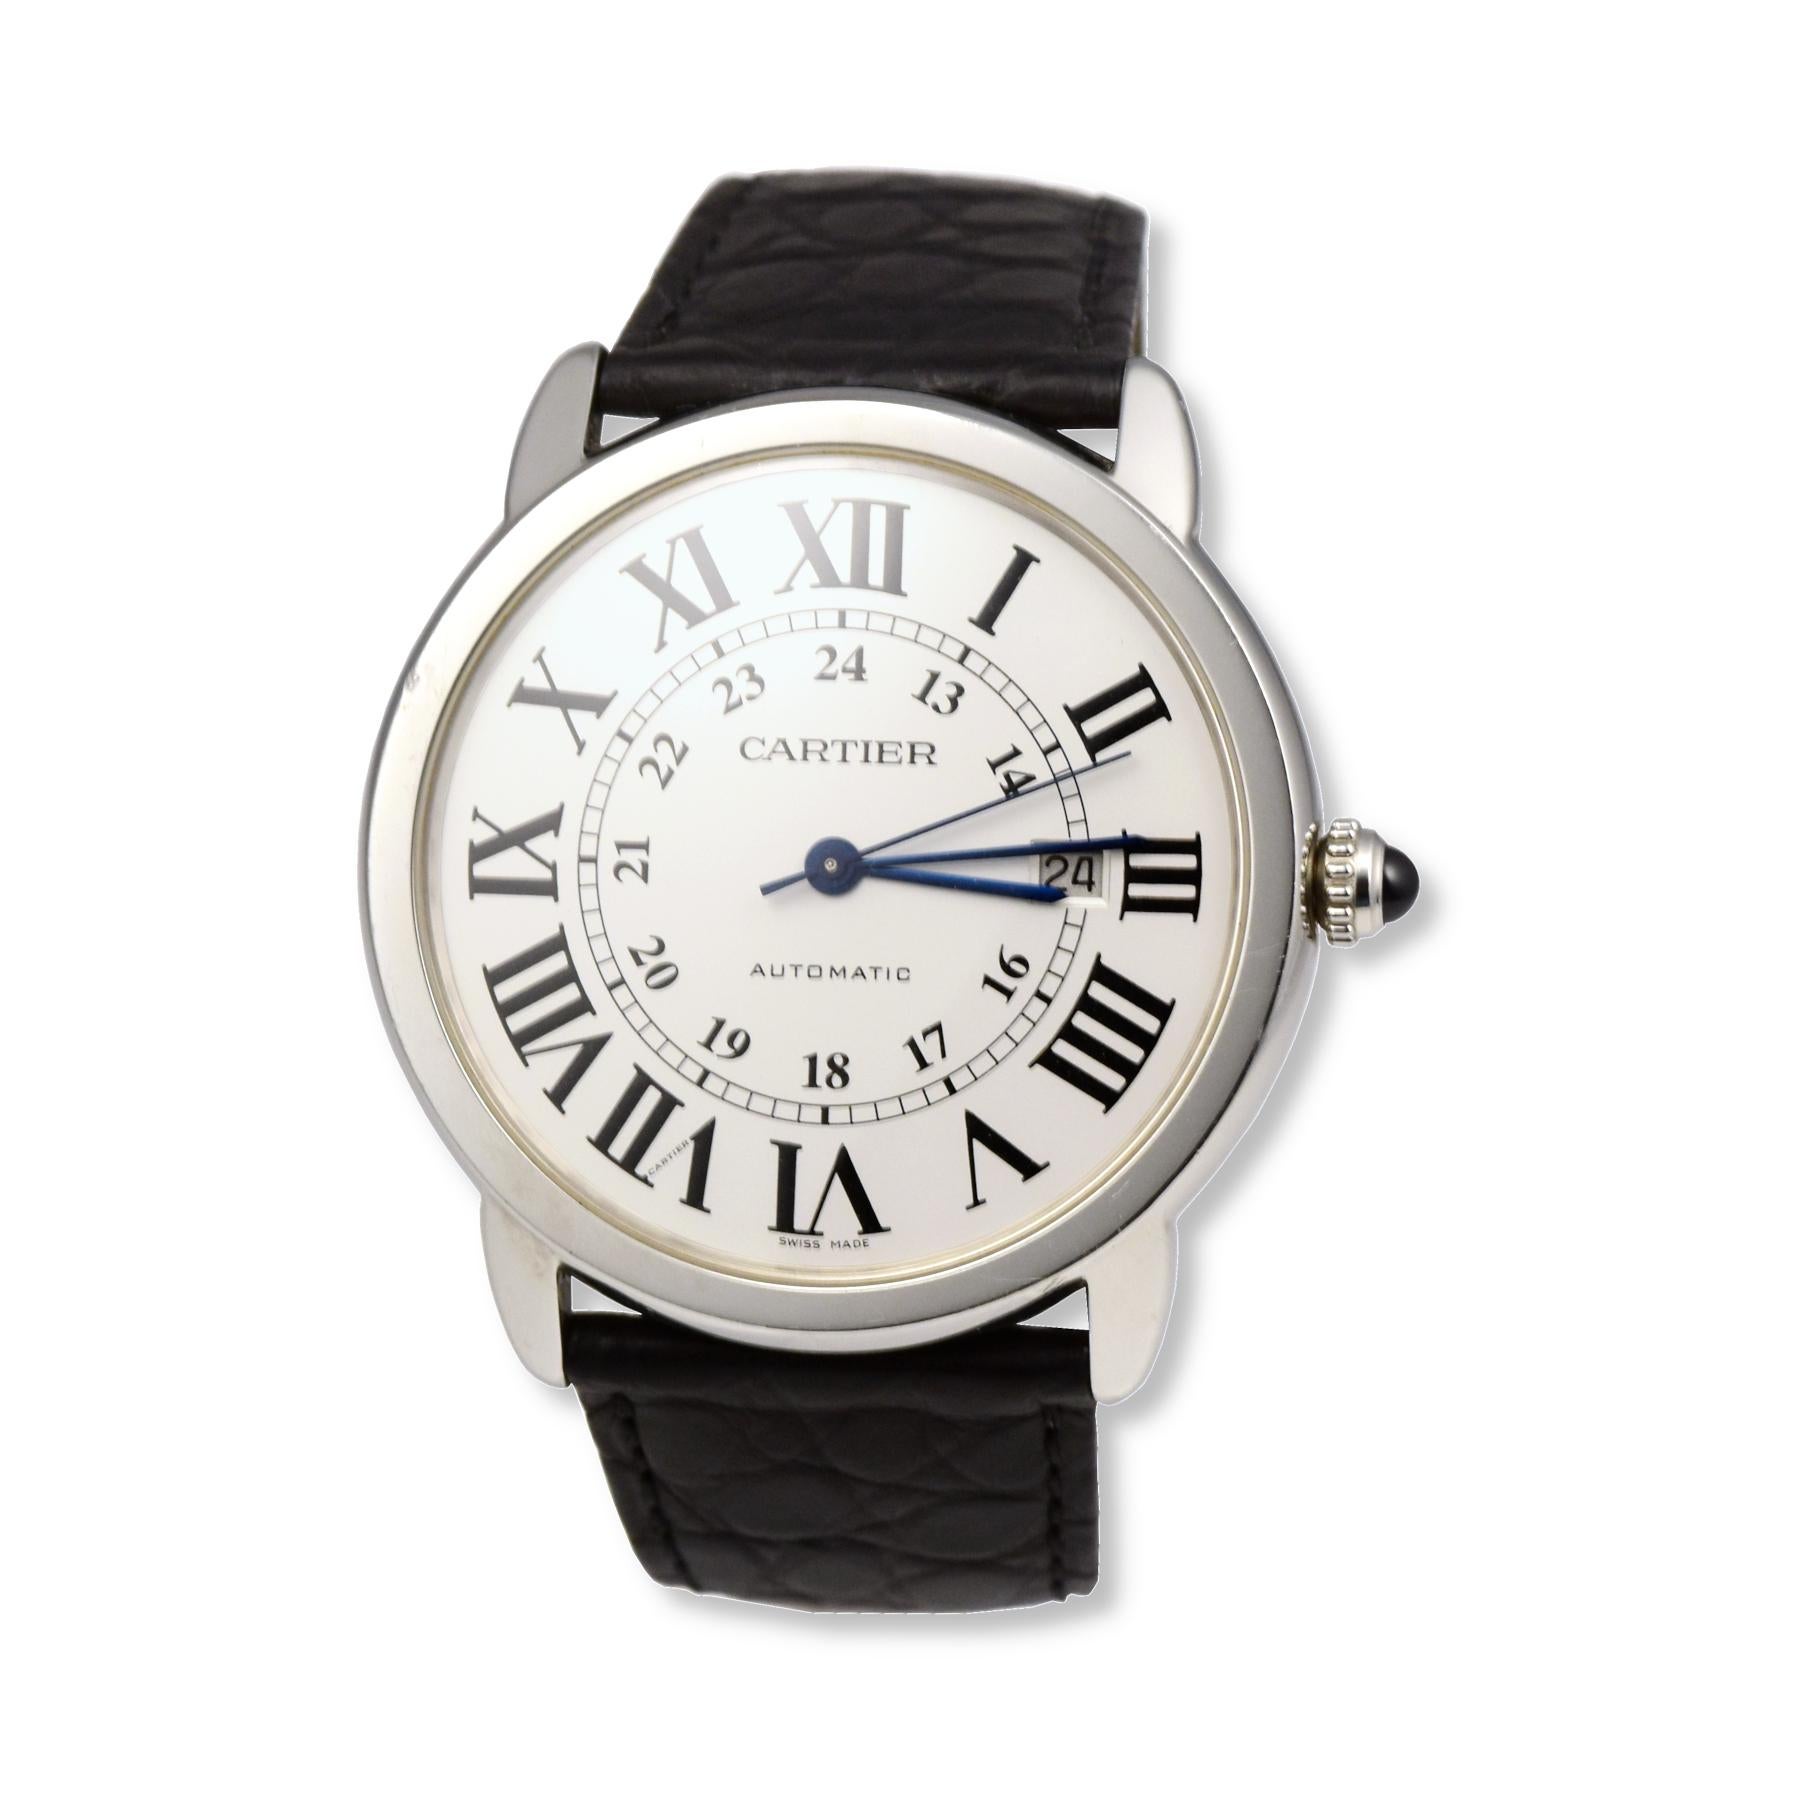 Women's or Men's Cartier Ronde Solo in Stainless Steel Black Leather Strap Watch